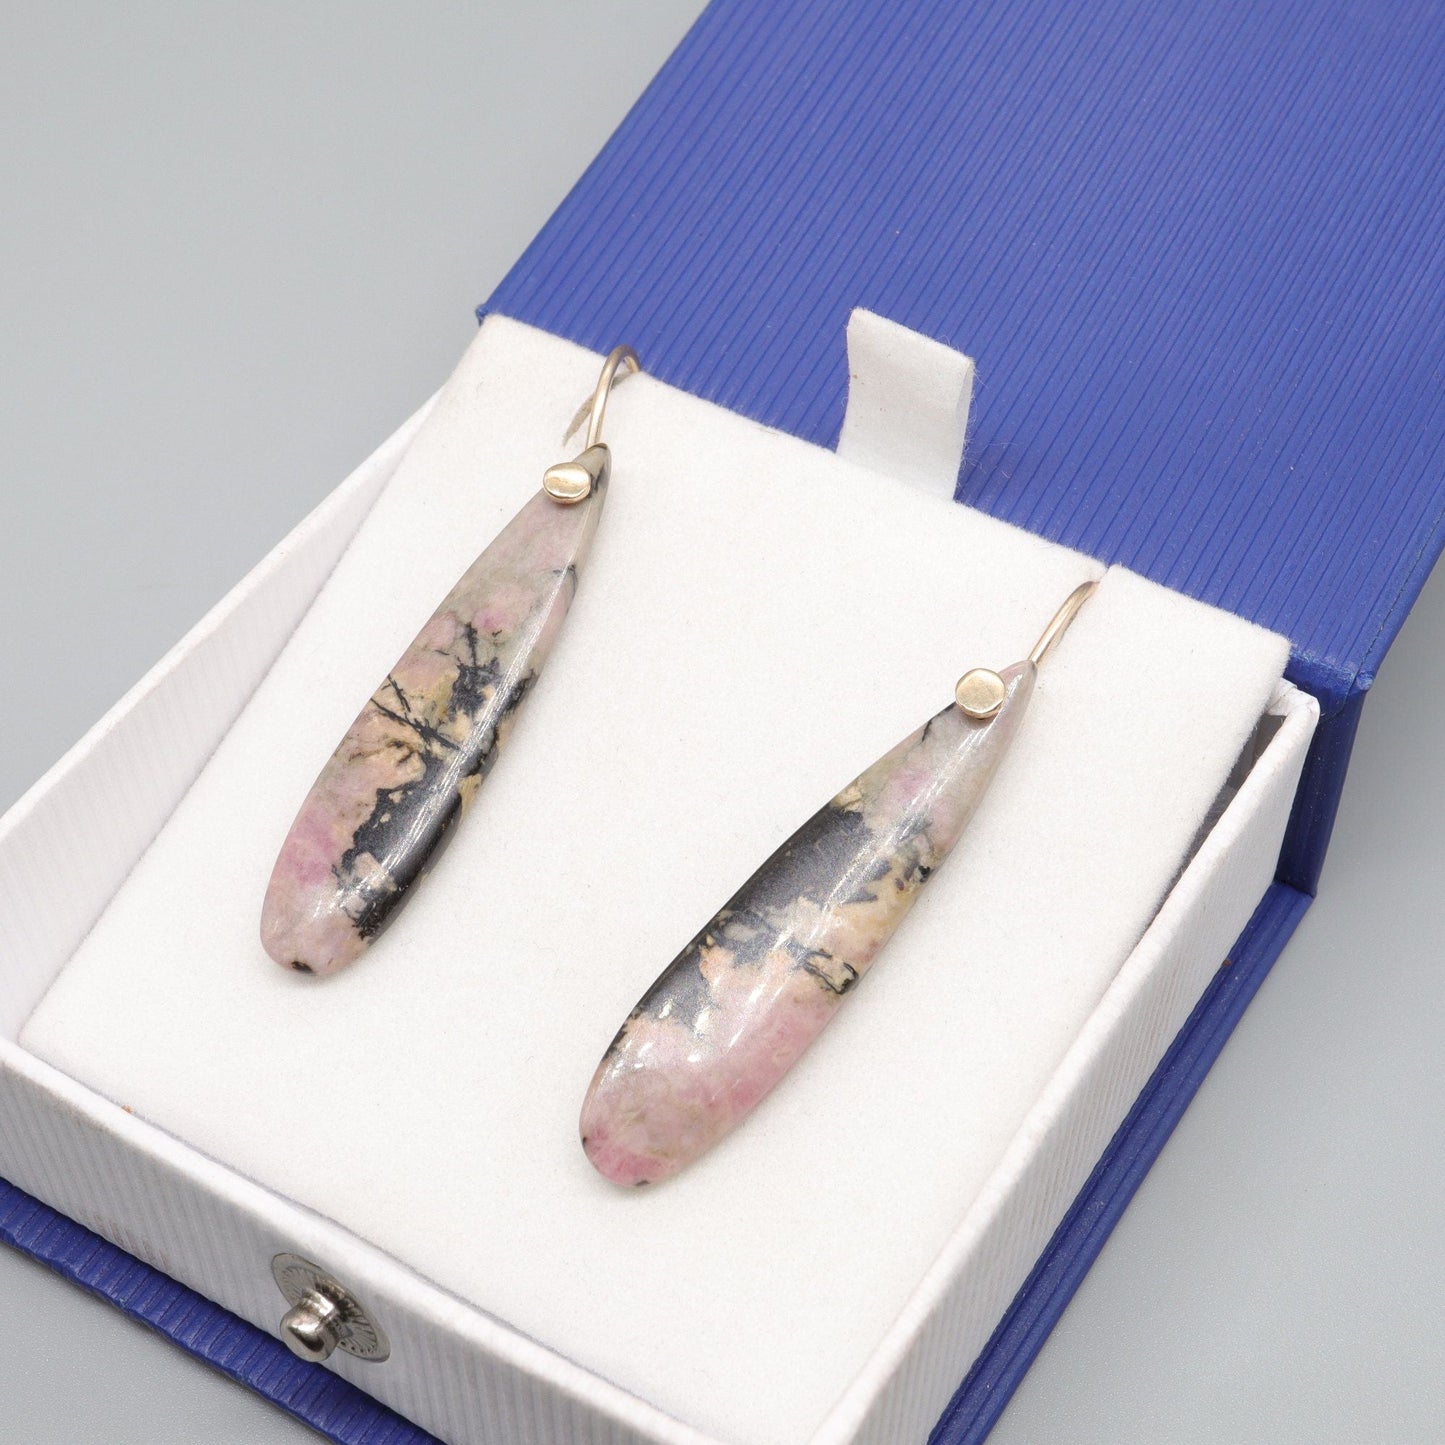 Drop earrings handmade pink and black Rhodonite with yellow gold fittings - Gretna Green Wedding Rings